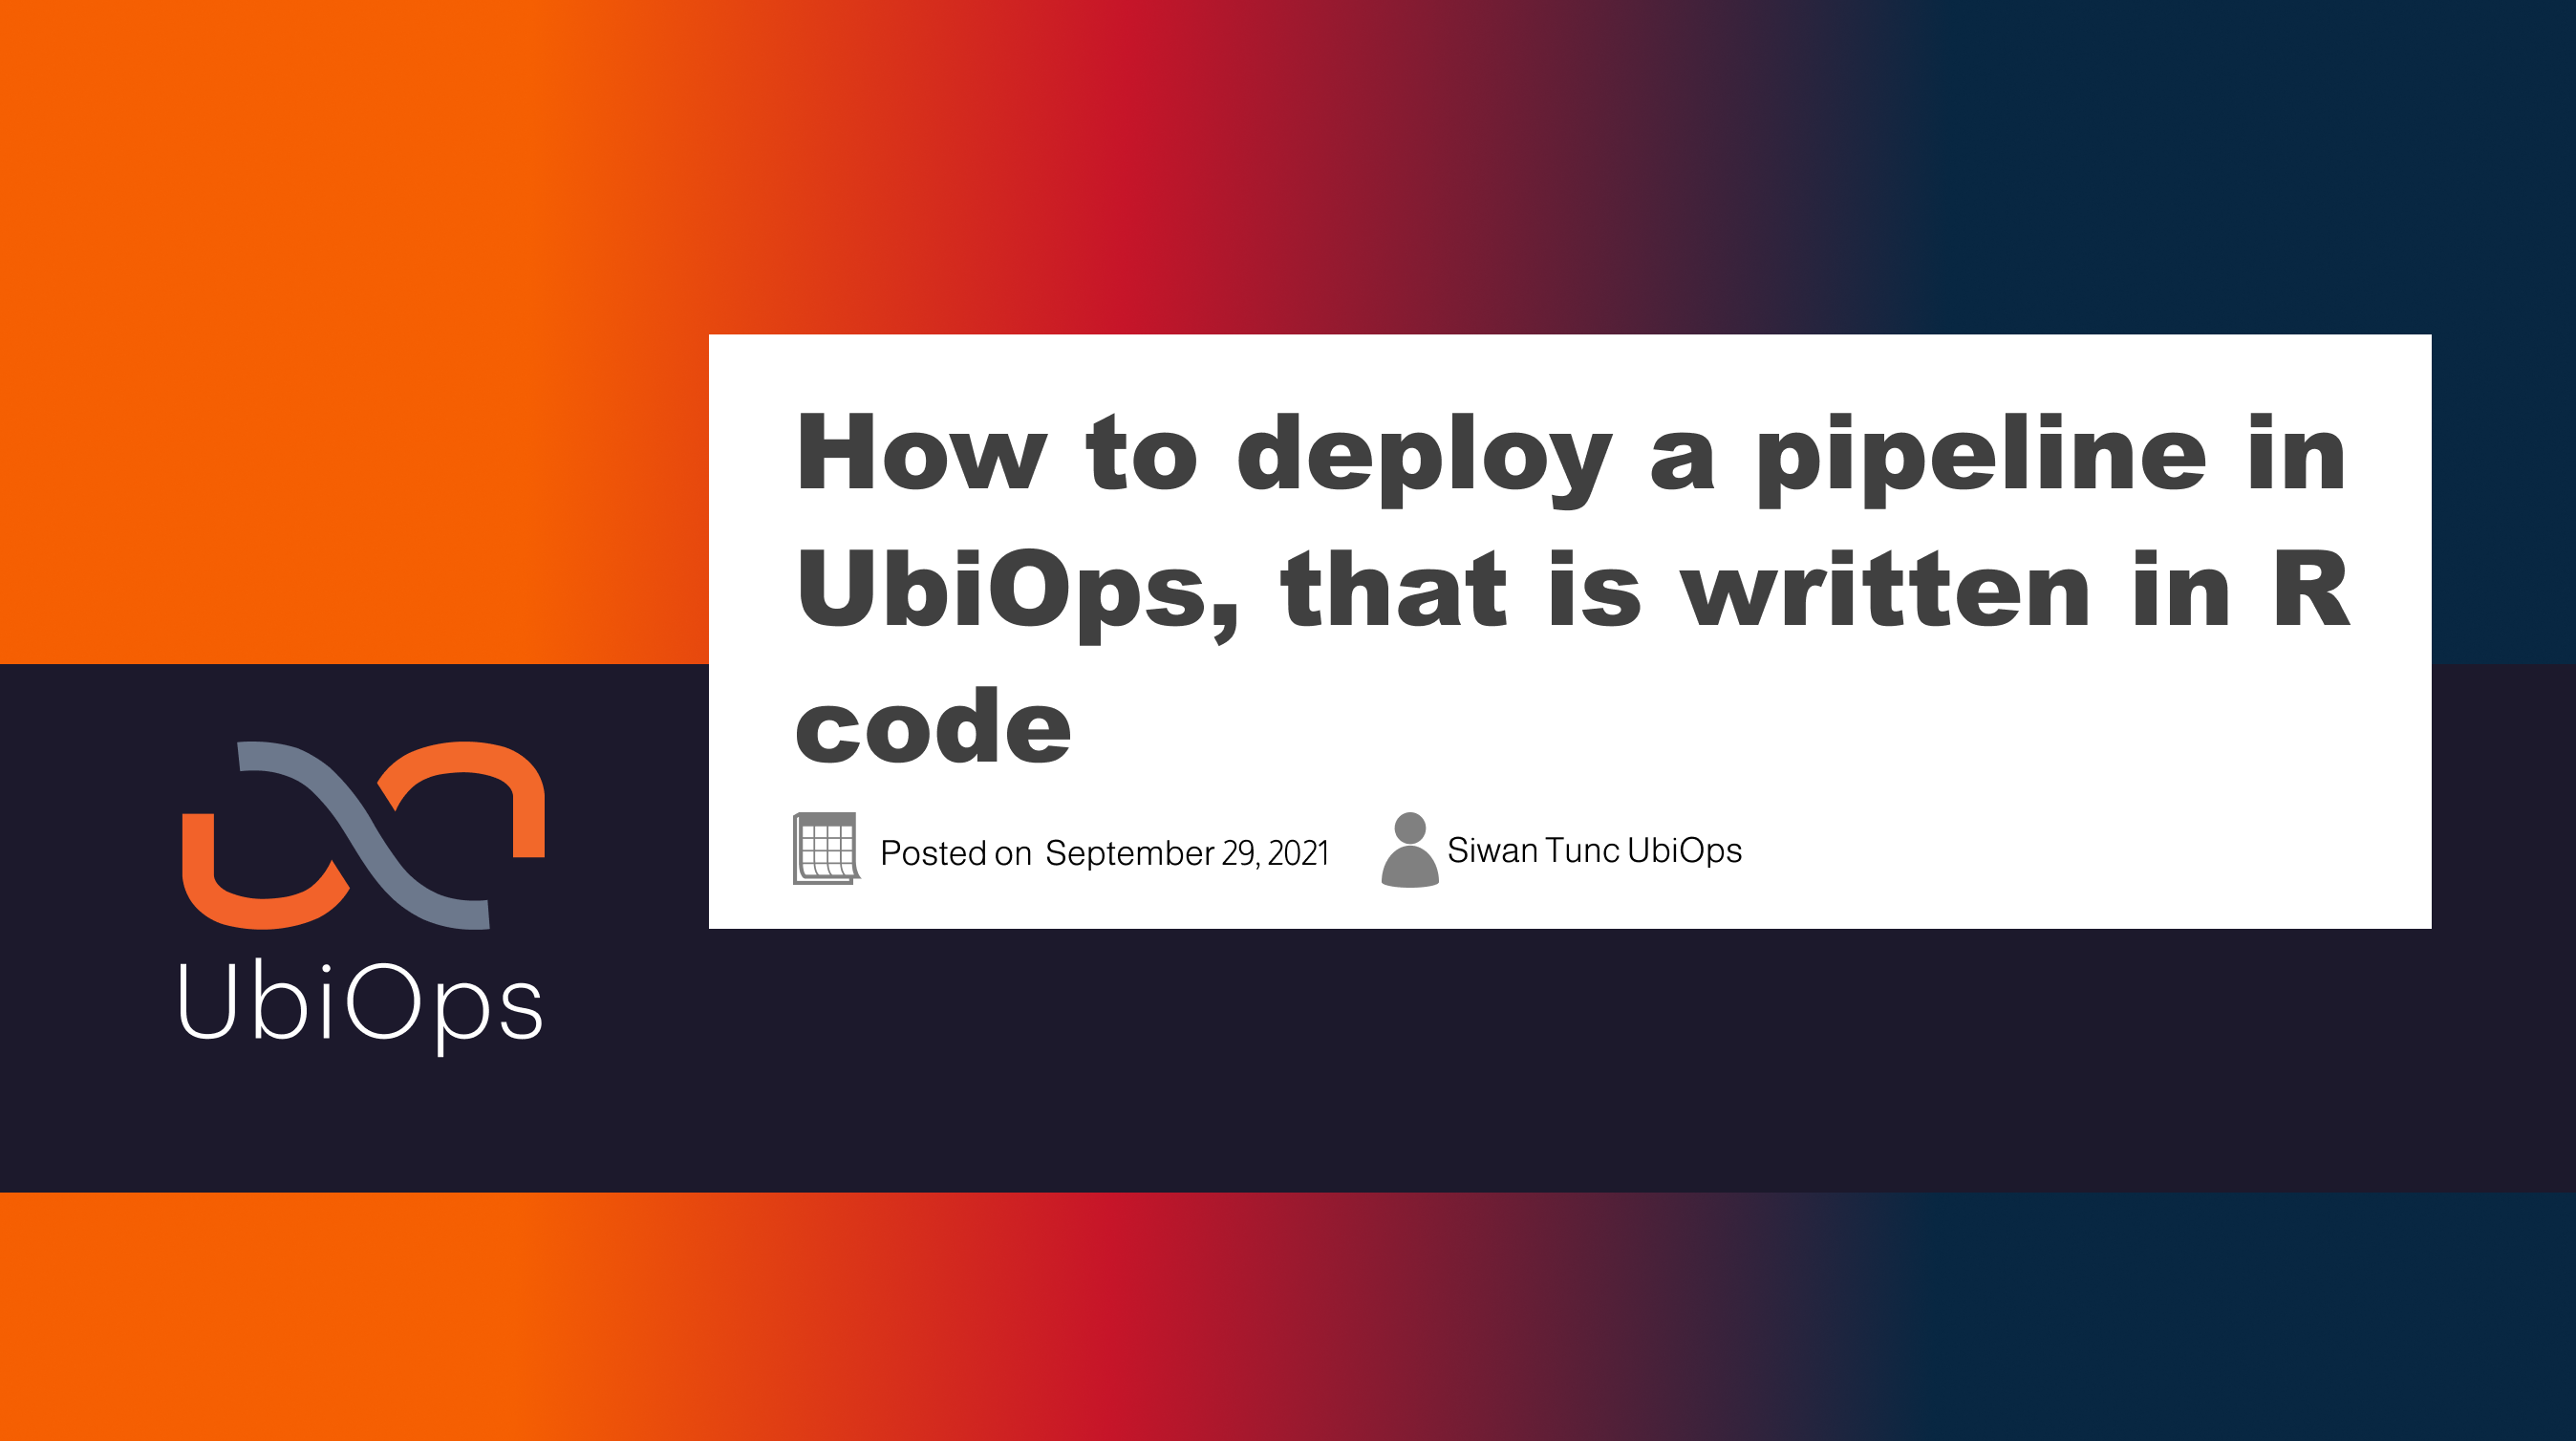 How to deploy a pipeline in UbiOps, that is written in R code.